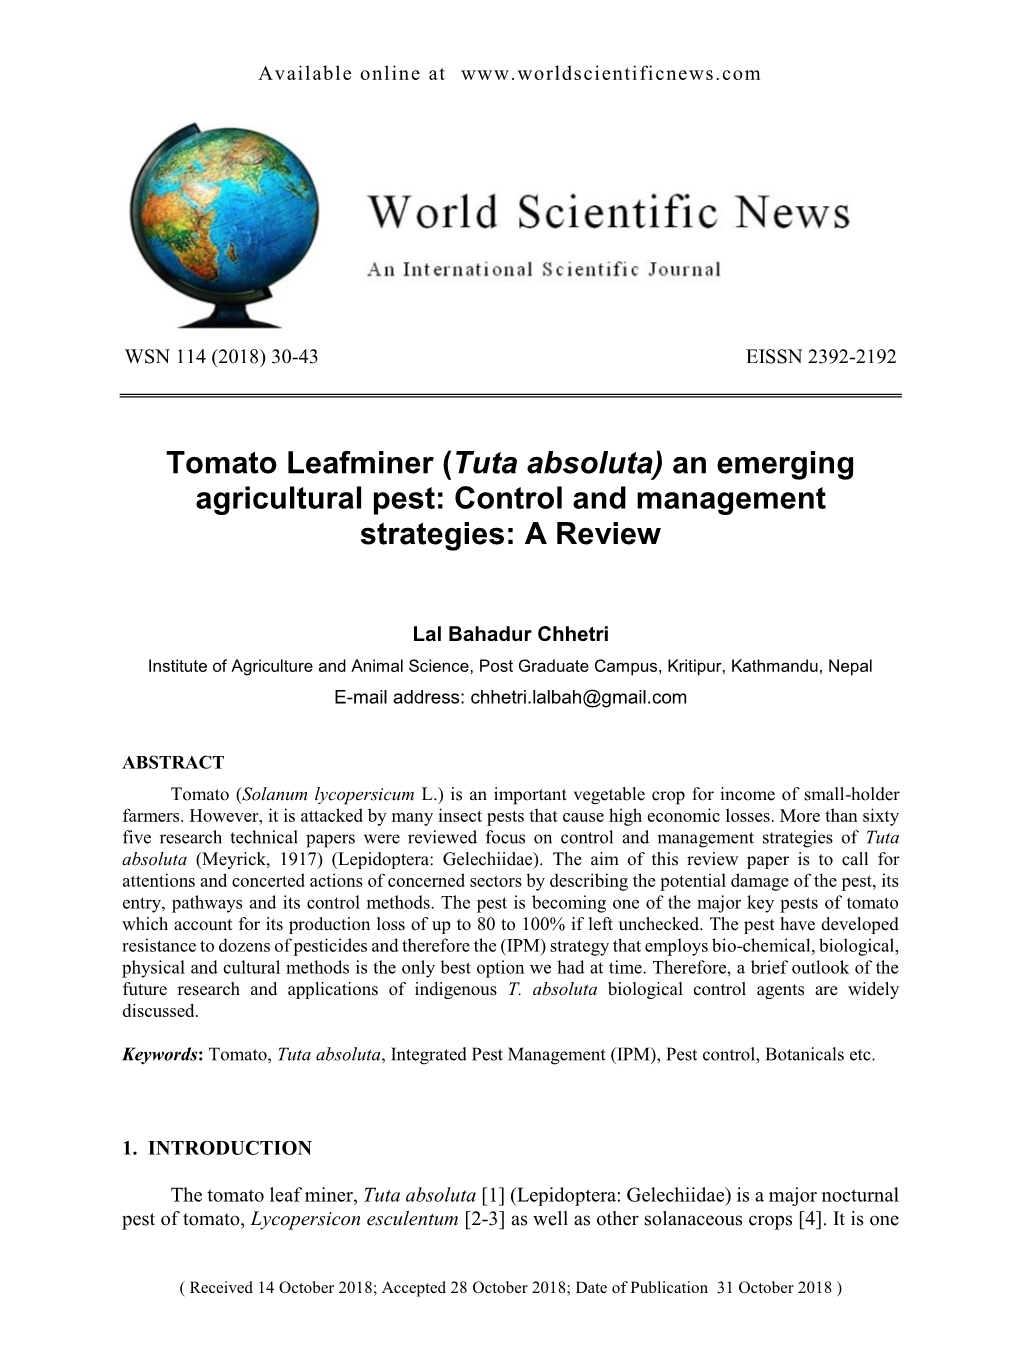 Tomato Leafminer (Tuta Absoluta) an Emerging Agricultural Pest: Control and Management Strategies: a Review